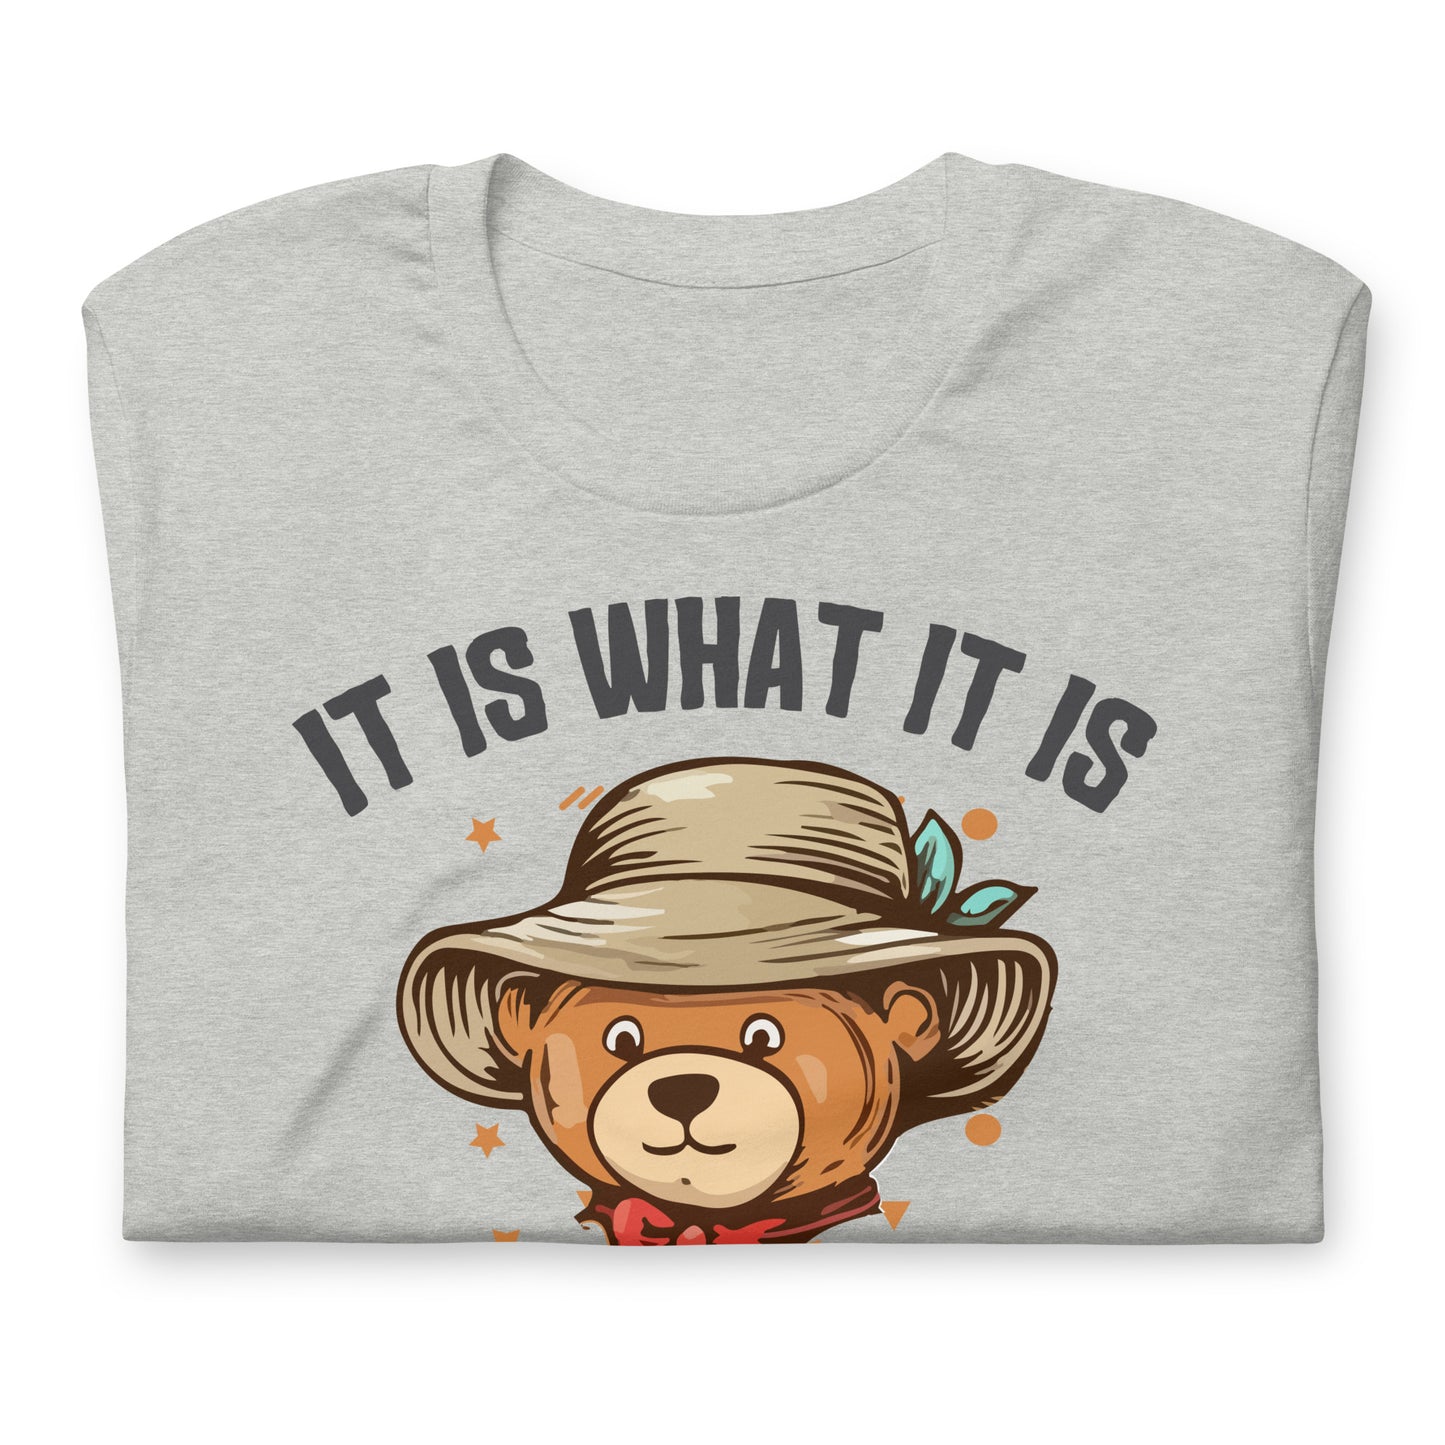 It Is What It Is, It's Not Great Quality Cotton Bella Canvas Adult T-Shirt